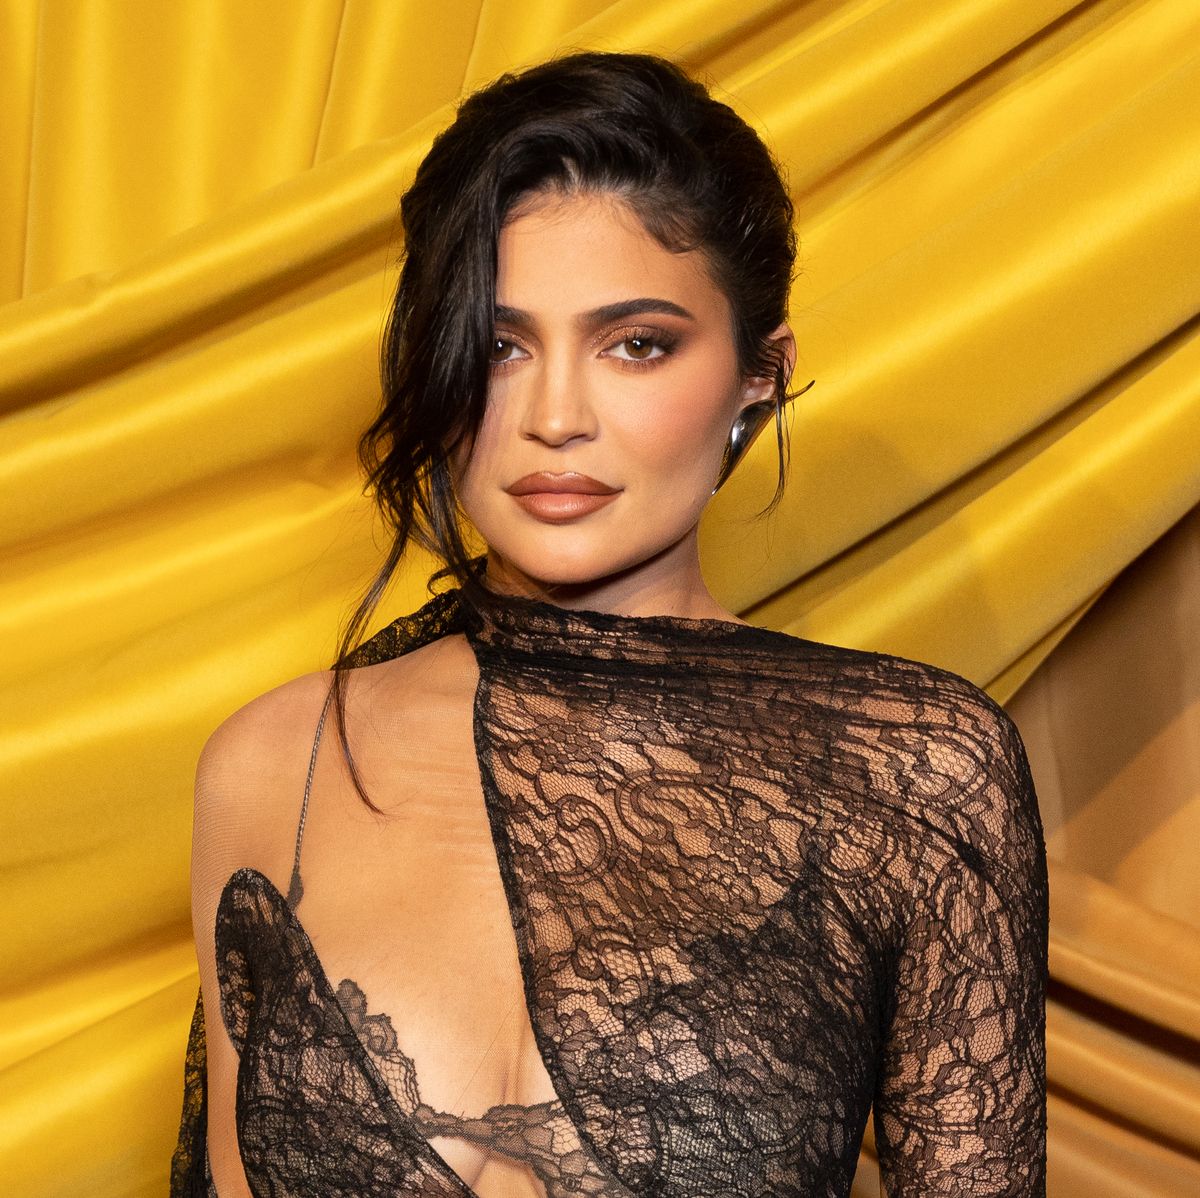 Kylie Jenner Shares Her Natural Hair One Year Into Growing It Out